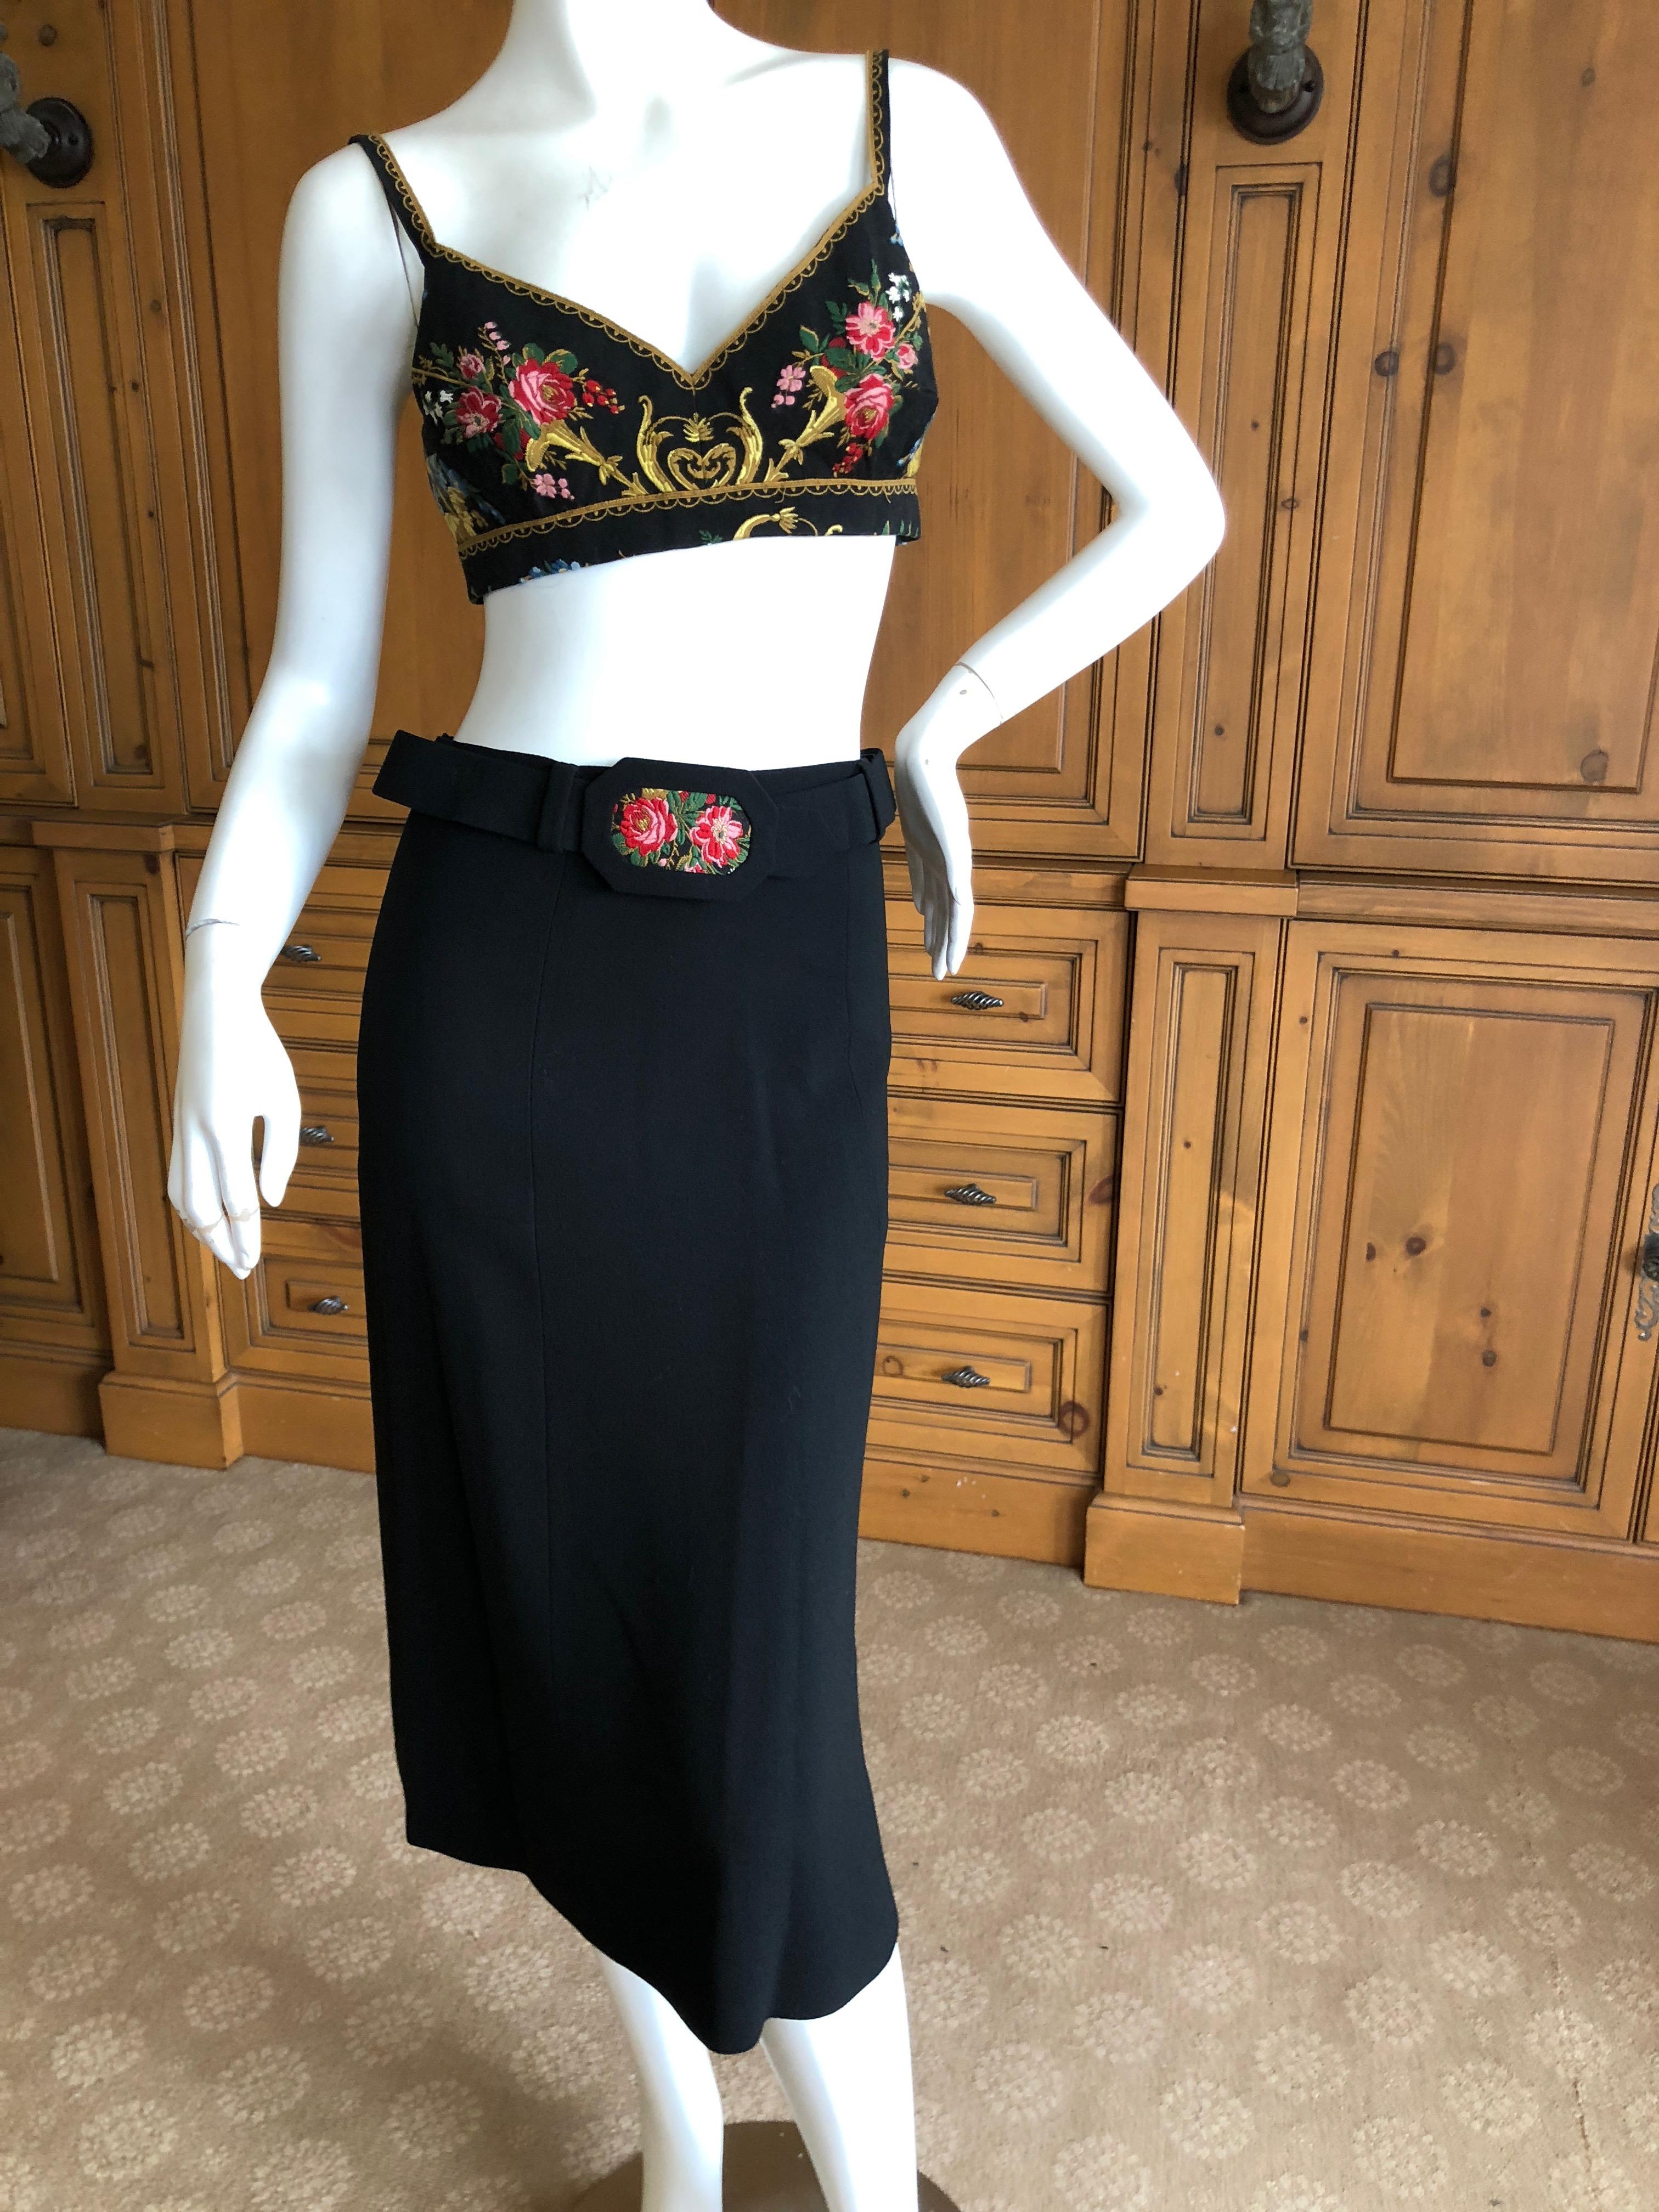 Cardinali Embroidered Black Cotton Skirt Suit with Midriff Baring Bra Fall 1971  For Sale 10